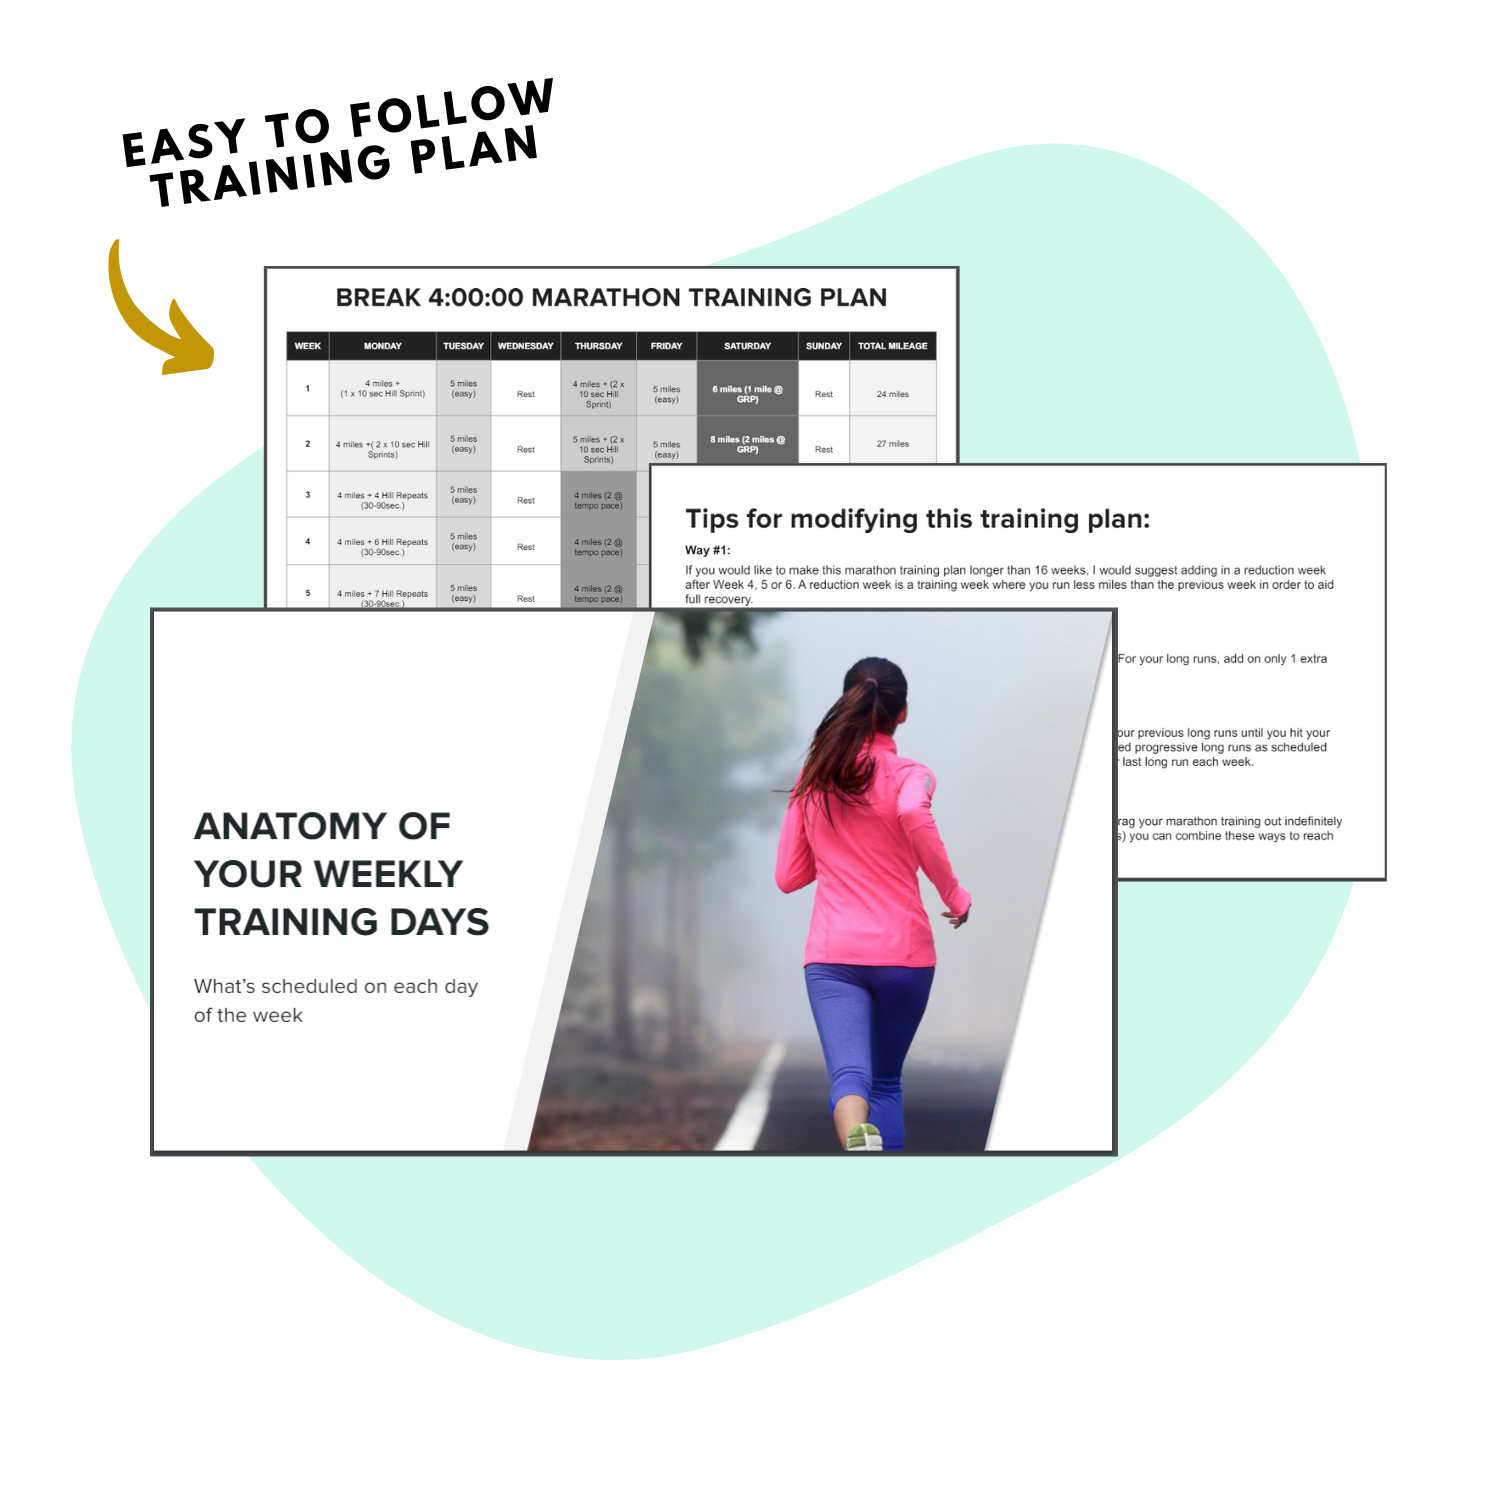 Easy to follow training plan for breaking a marathon time goal in 16 weeks